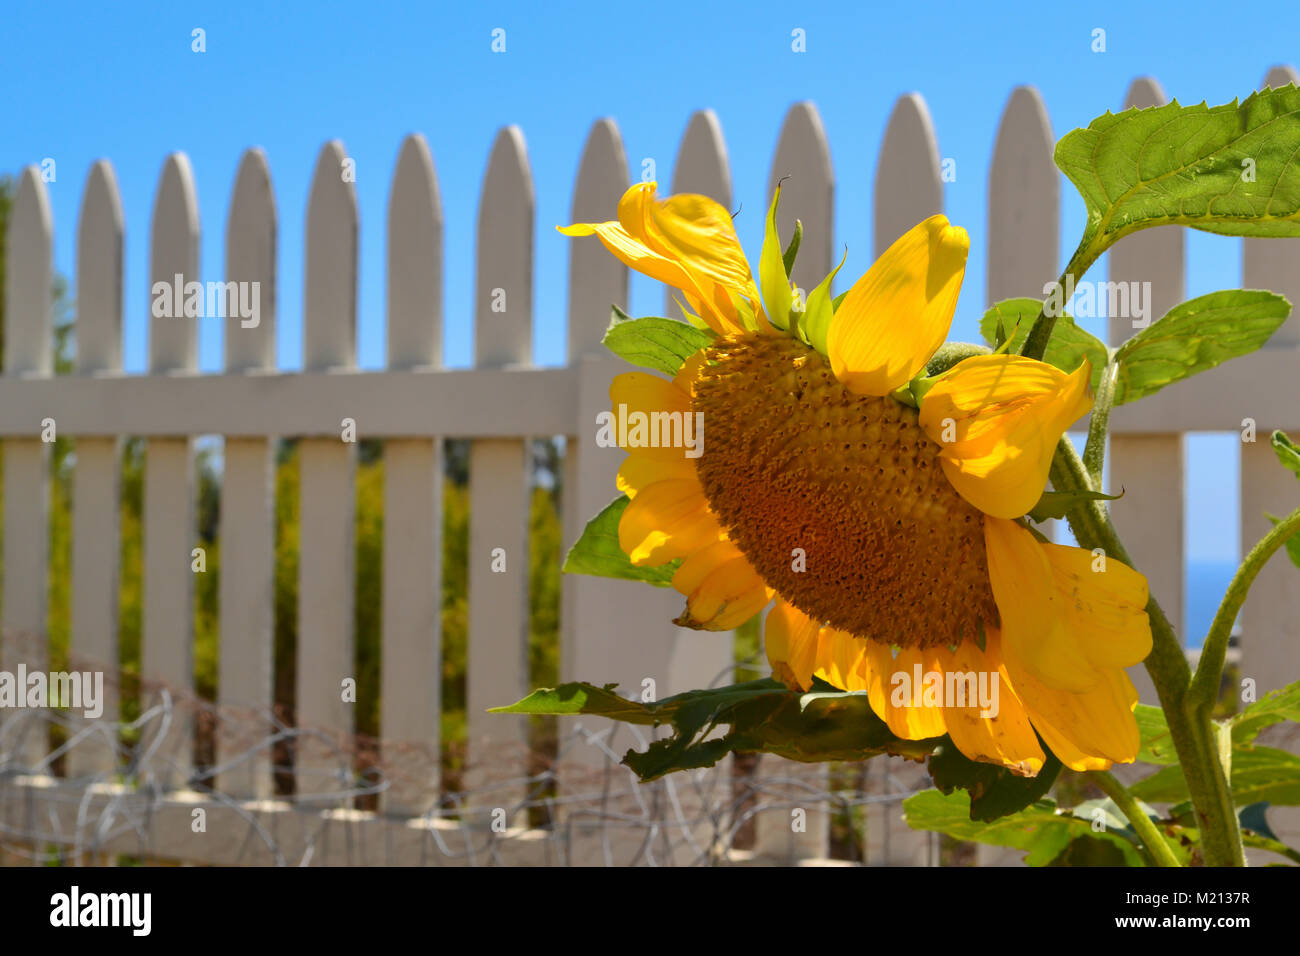 Single sunflower growing  in a white picket fence garden on a hillside overlooking the ocean Stock Photo